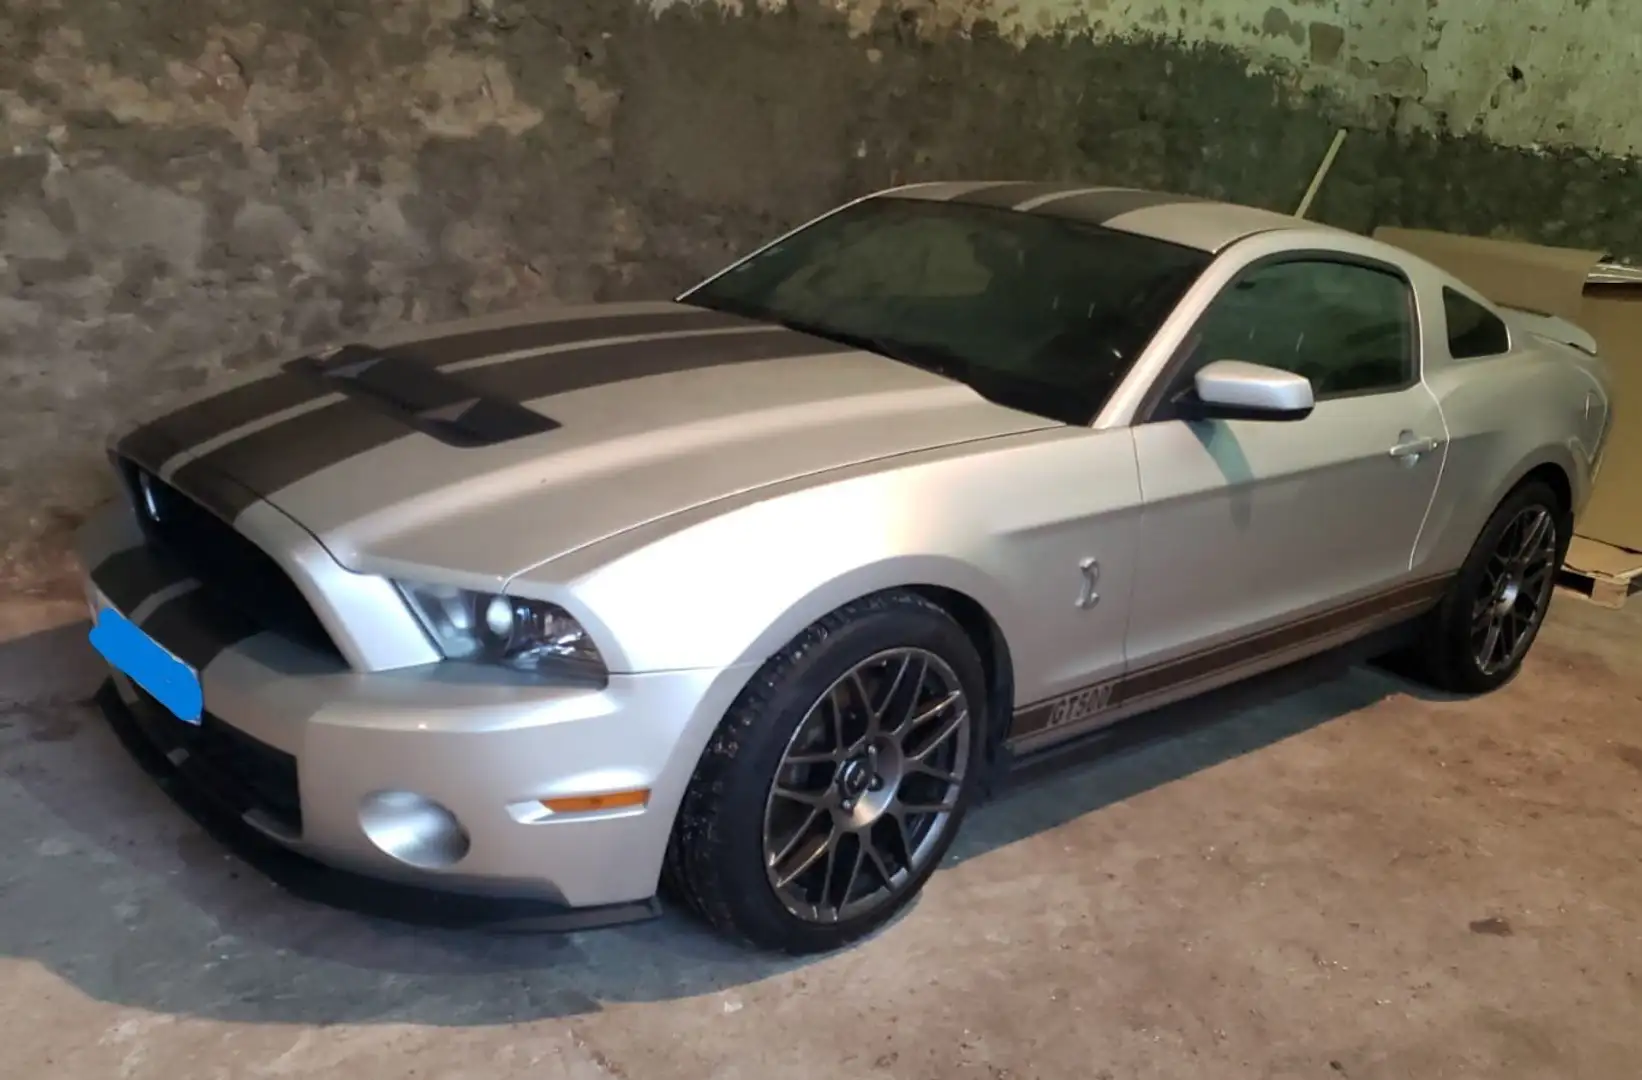 Ford Mustang GT 500 Shelby 2012 v8 5.4L Silber - 1